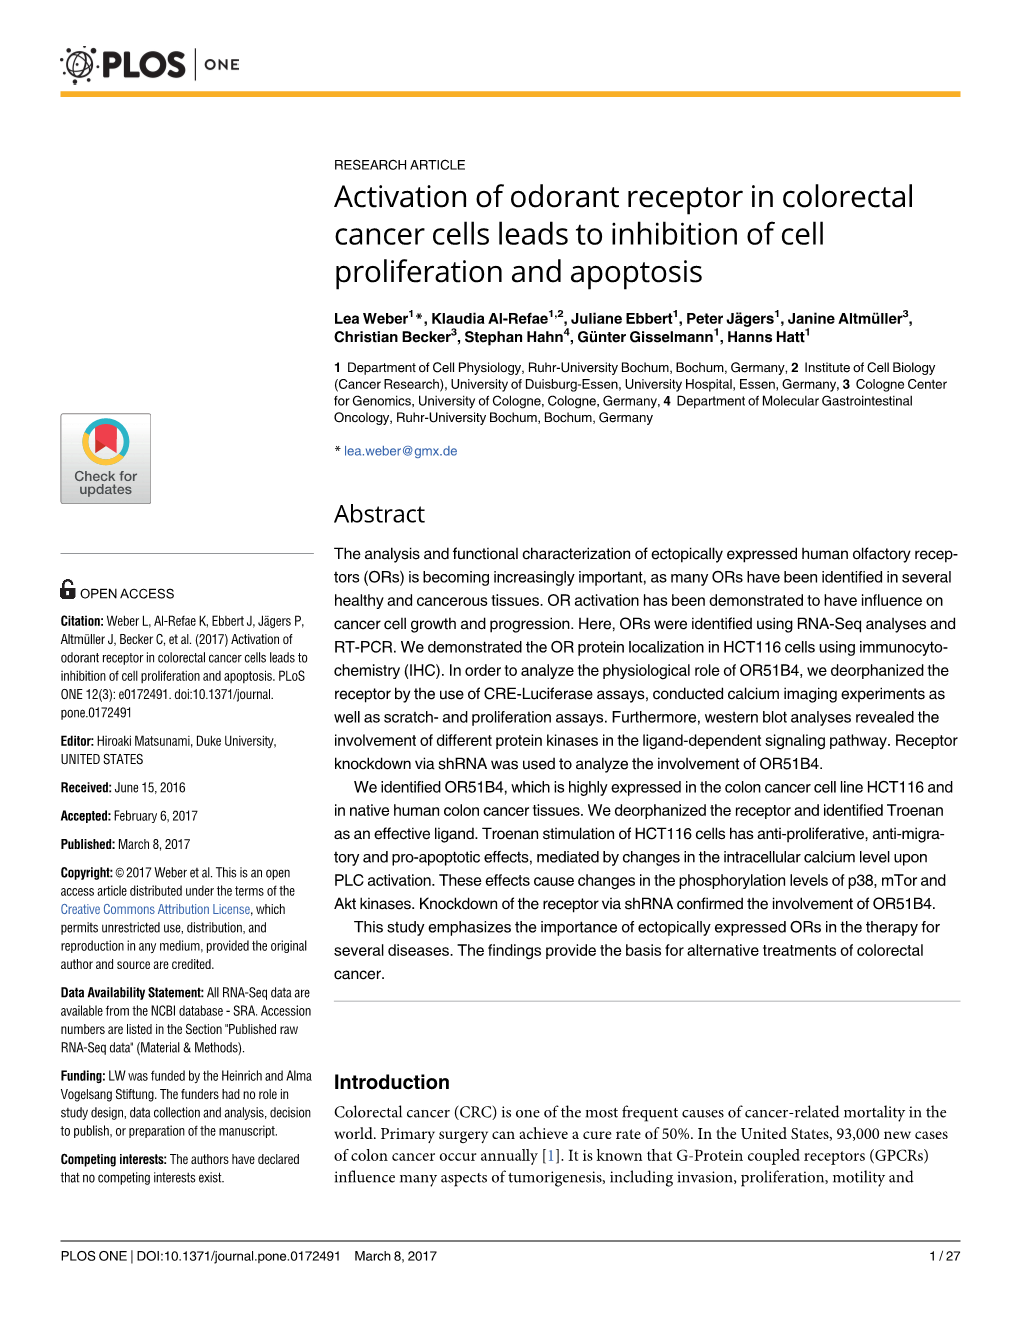 Activation of Odorant Receptor in Colorectal Cancer Cells Leads to Inhibition of Cell Proliferation and Apoptosis